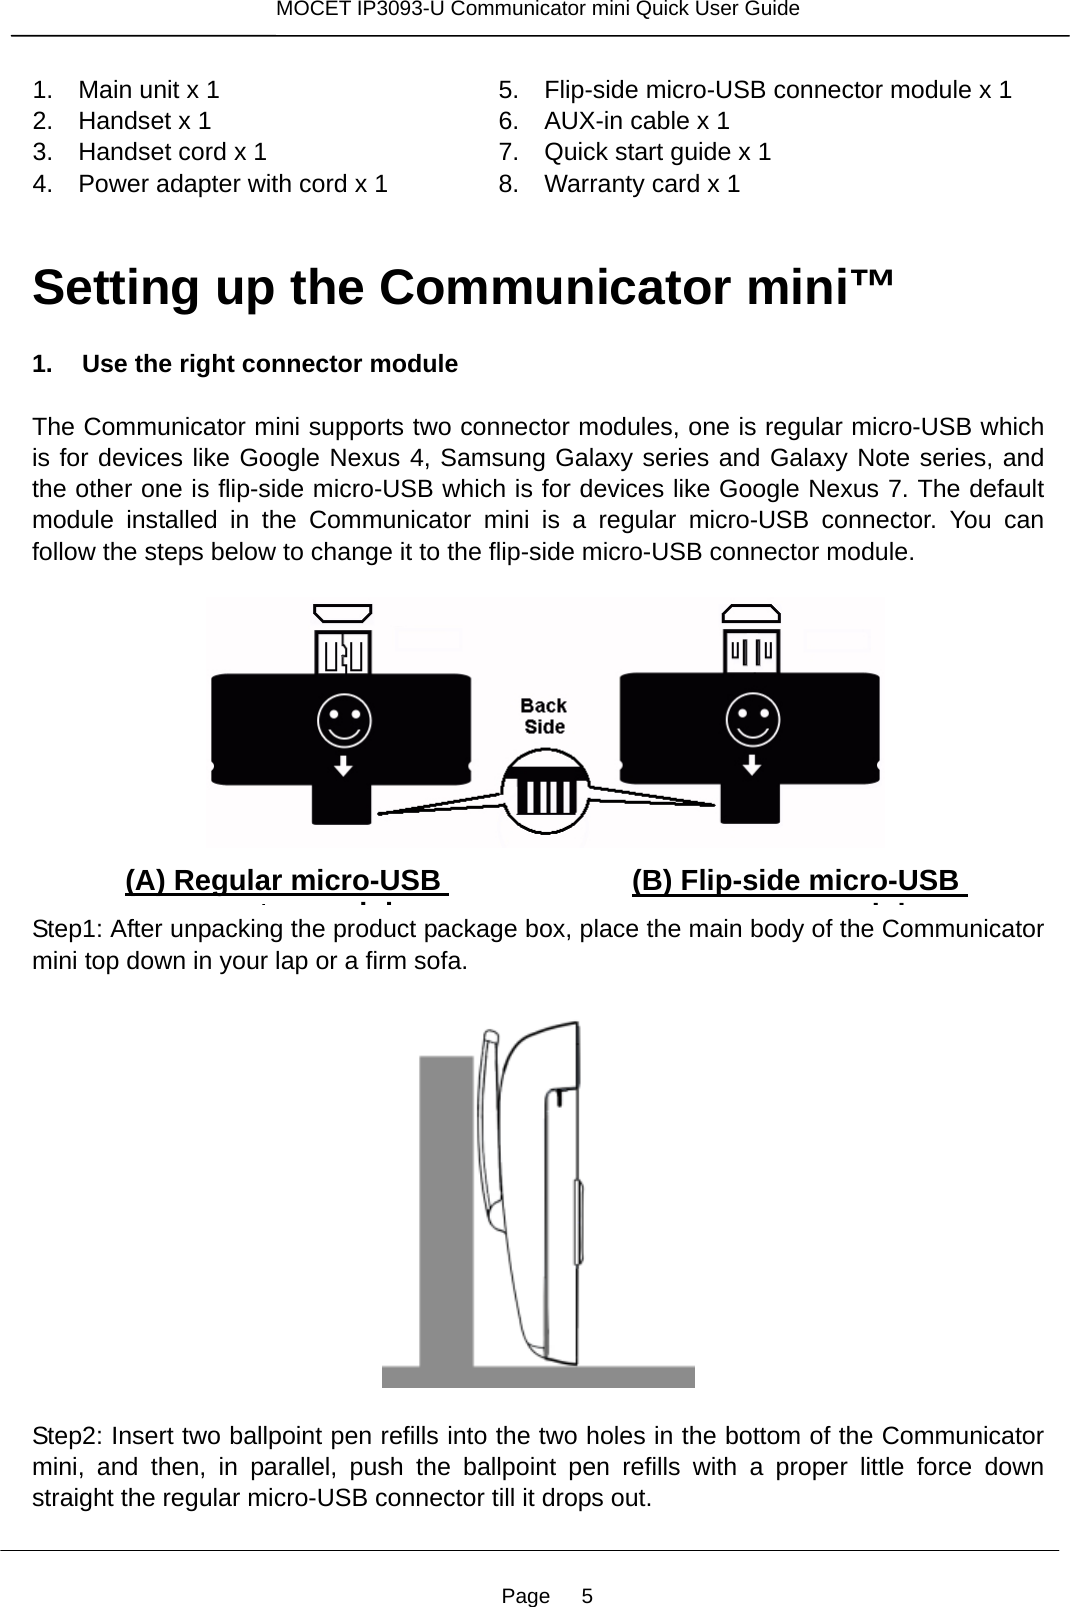 Page   5 MOCET IP3093-U Communicator mini Quick User Guide  1.    Main unit x 1 2.  Handset x 1 3.    Handset cord x 1 4.    Power adapter with cord x 1 5.  Flip-side micro-USB connector module x 1 6.    AUX-in cable x 1 7.    Quick start guide x 1 8.    Warranty card x 1  Setting up the Communicator mini™  1. Use the right connector module  The Communicator mini supports two connector modules, one is regular micro-USB which is for devices like Google Nexus 4, Samsung Galaxy series and Galaxy Note series, and the other one is flip-side micro-USB which is for devices like Google Nexus 7. The default module installed in the Communicator mini is a regular micro-USB connector. You can follow the steps below to change it to the flip-side micro-USB connector module.          Step1: After unpacking the product package box, place the main body of the Communicator mini top down in your lap or a firm sofa.    Step2: Insert two ballpoint pen refills into the two holes in the bottom of the Communicator mini, and then, in parallel, push the ballpoint pen refills with a proper little force down straight the regular micro-USB connector till it drops out.   (A) Regular micro-USB tdl(B) Flip-side micro-USB tdl